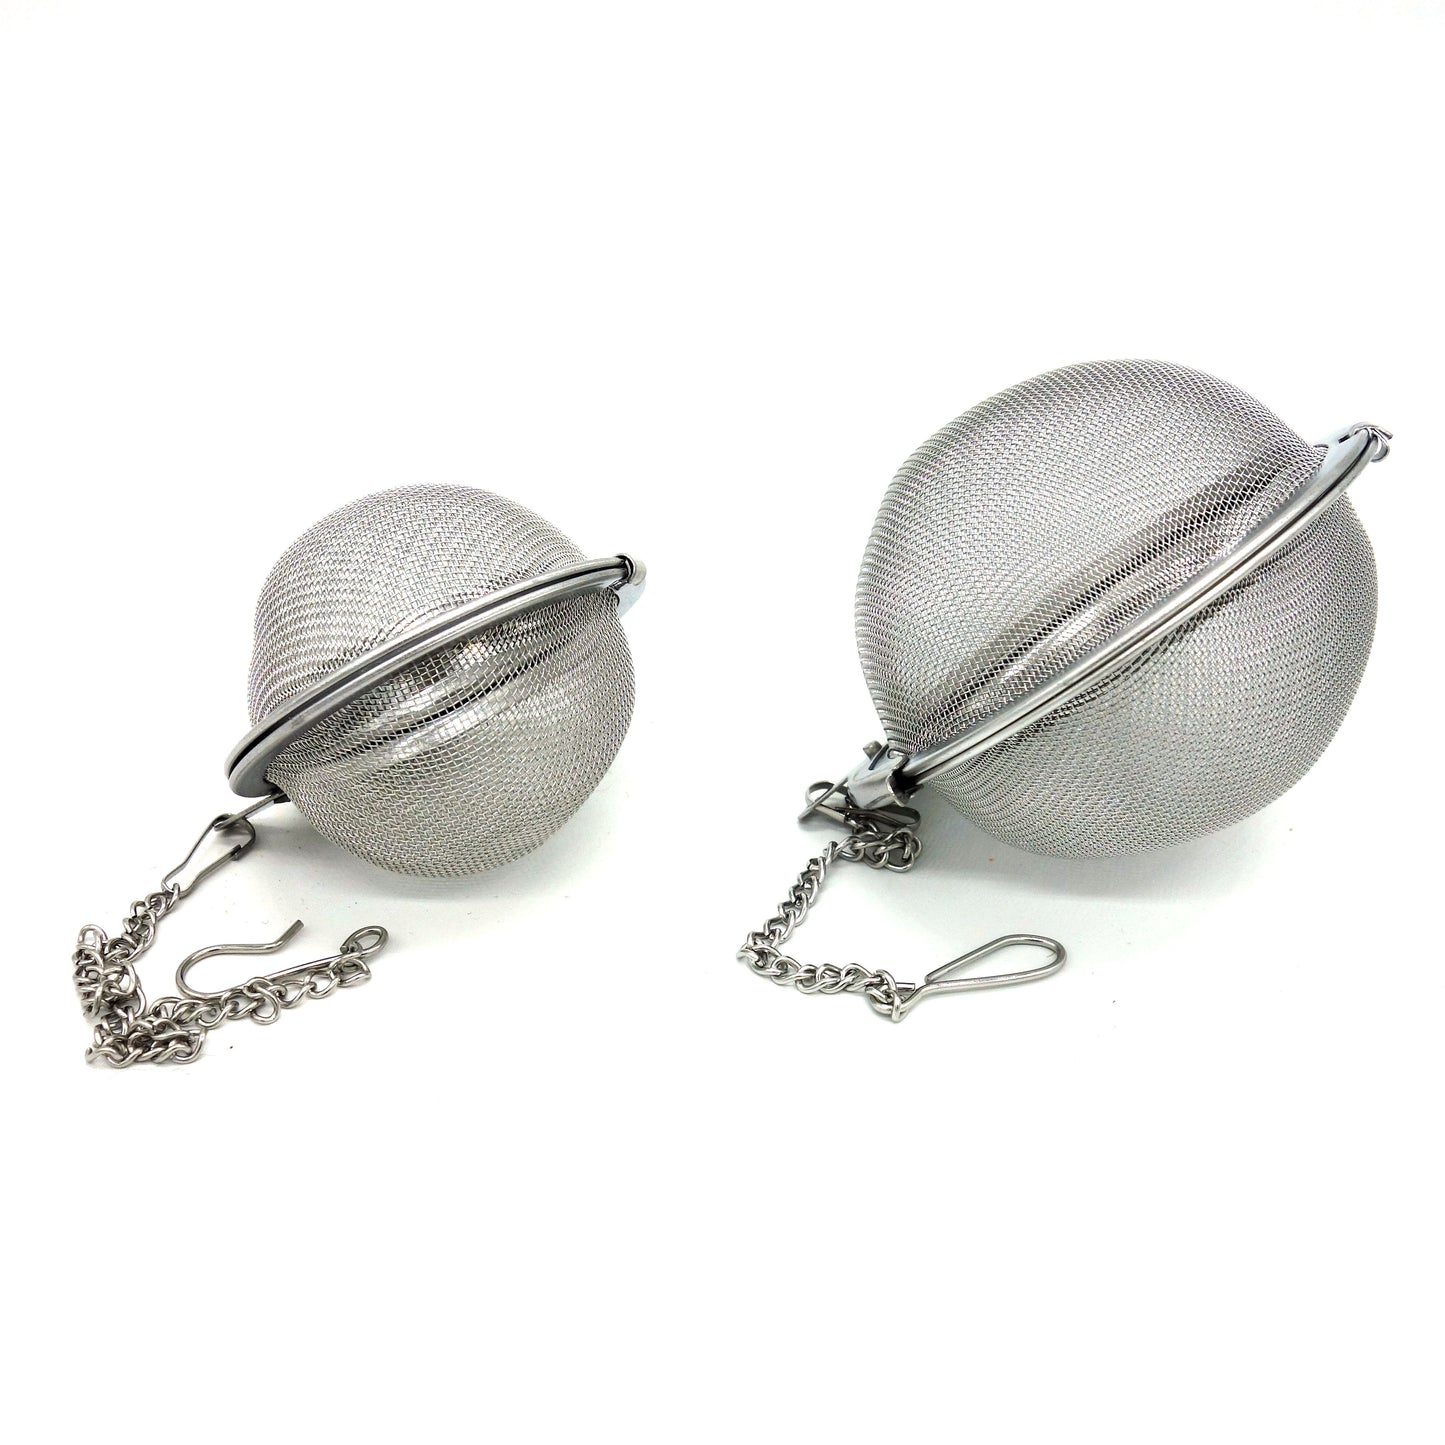 Infuser - Ball 2"